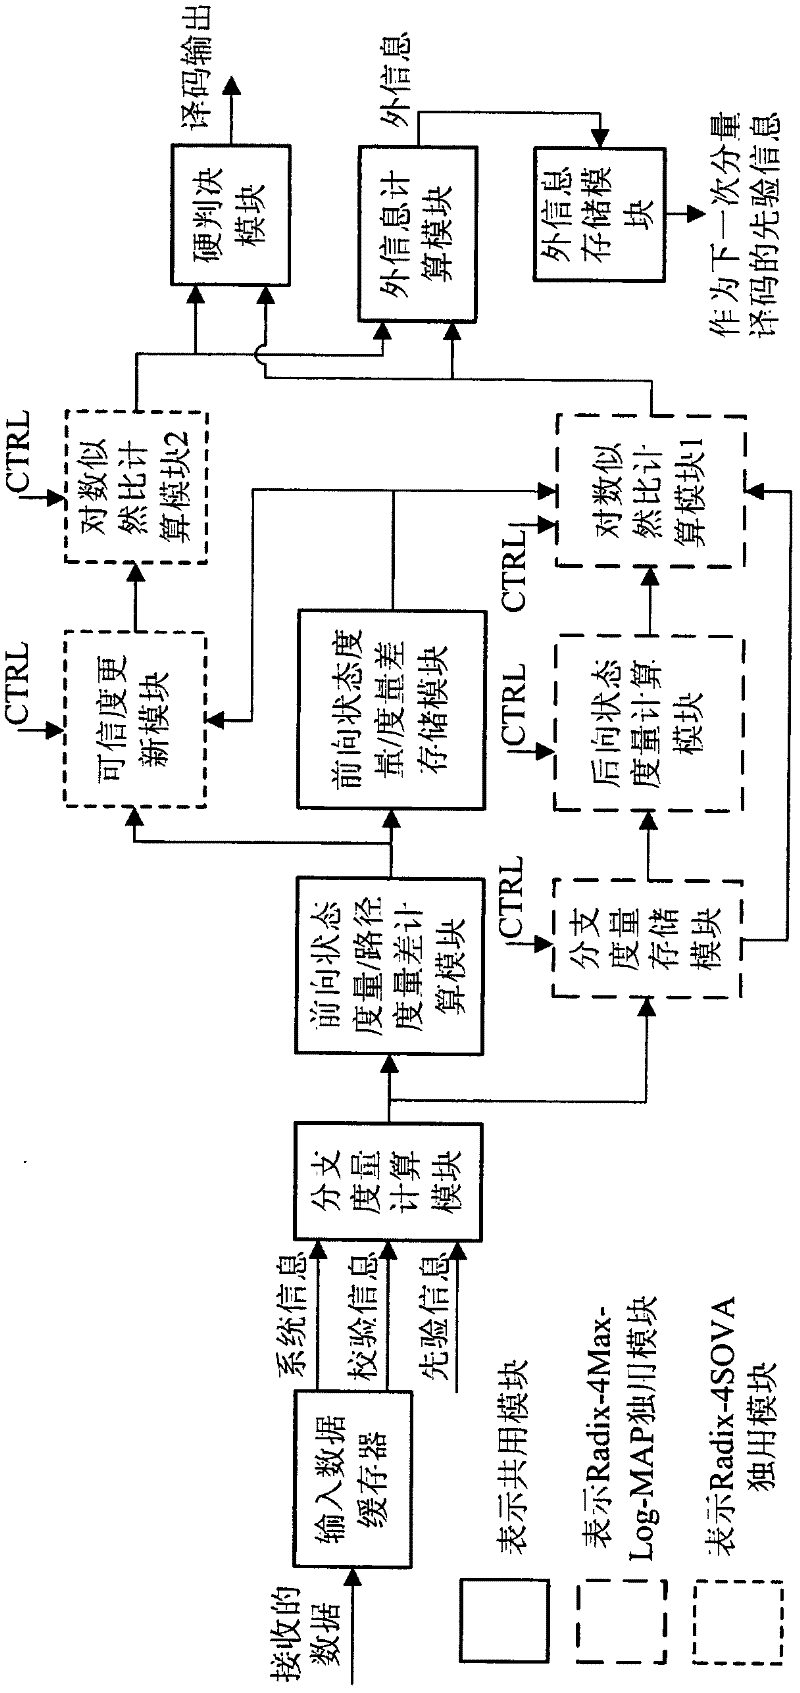 Universal and configurable high-speed Turbo code decoding system and method thereof